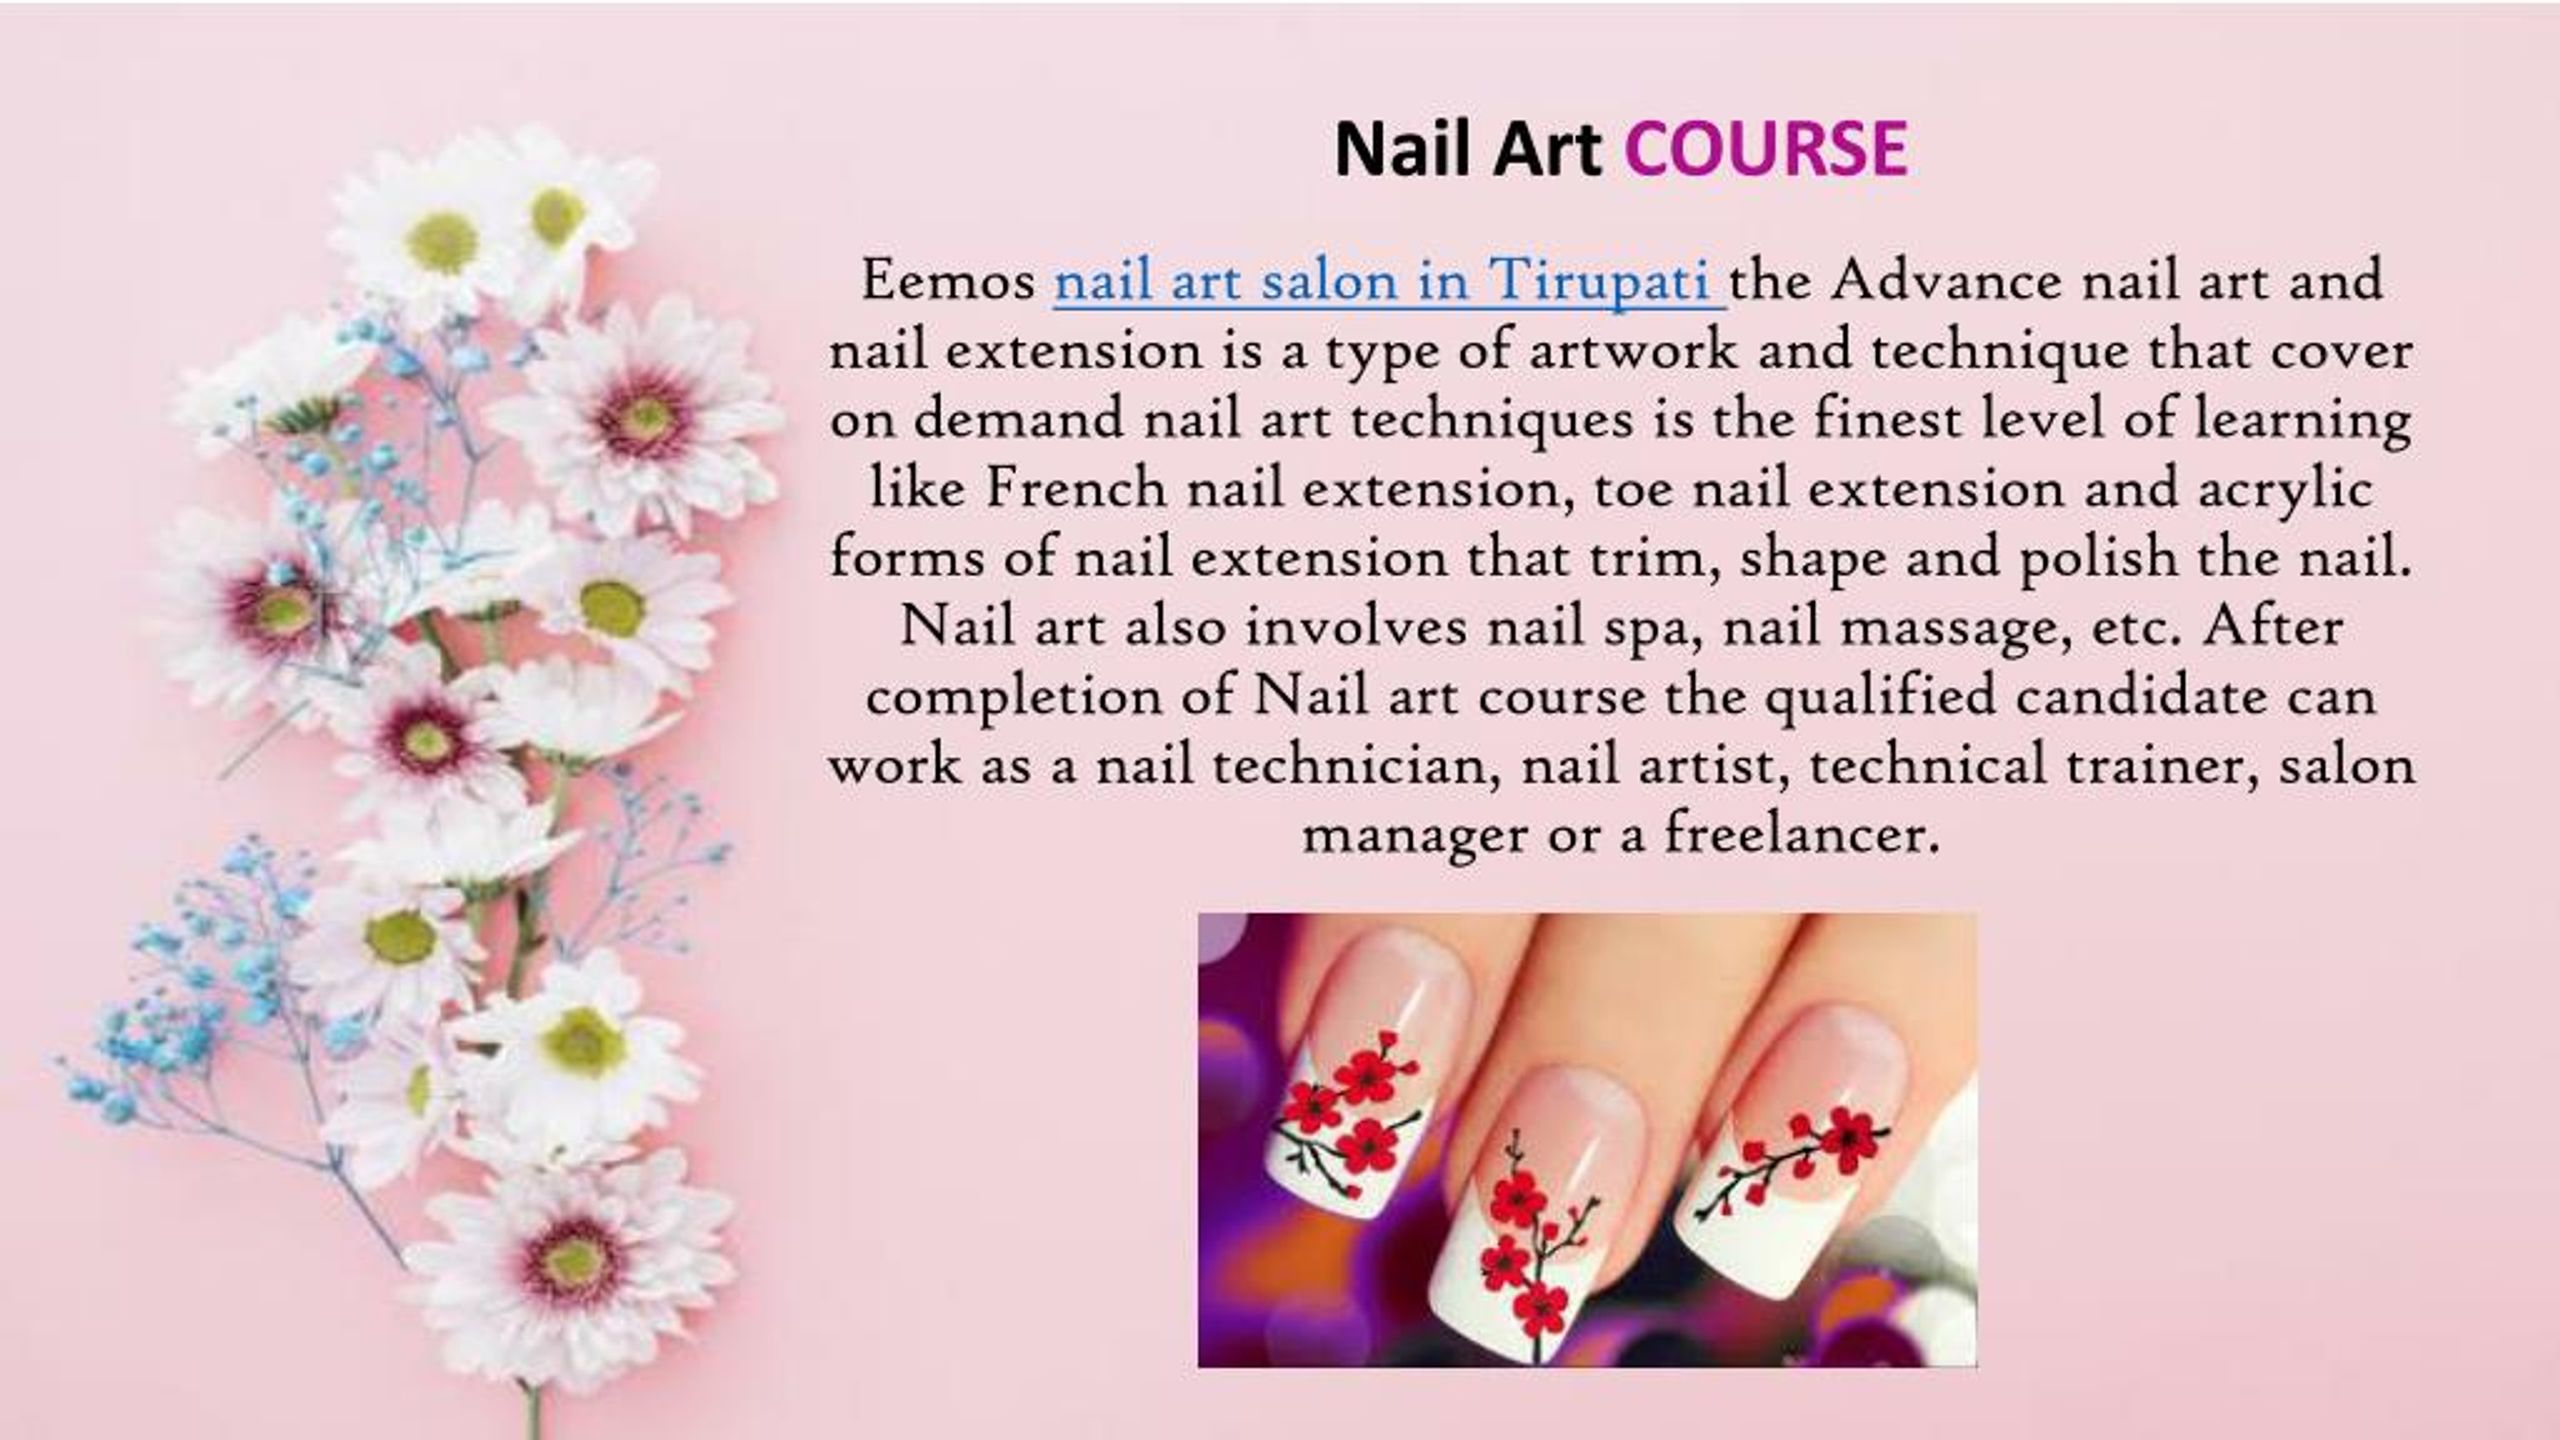 The Best Recommended Nail Art Course in India | Nail art courses, Nail art  techniques, Nail art salon